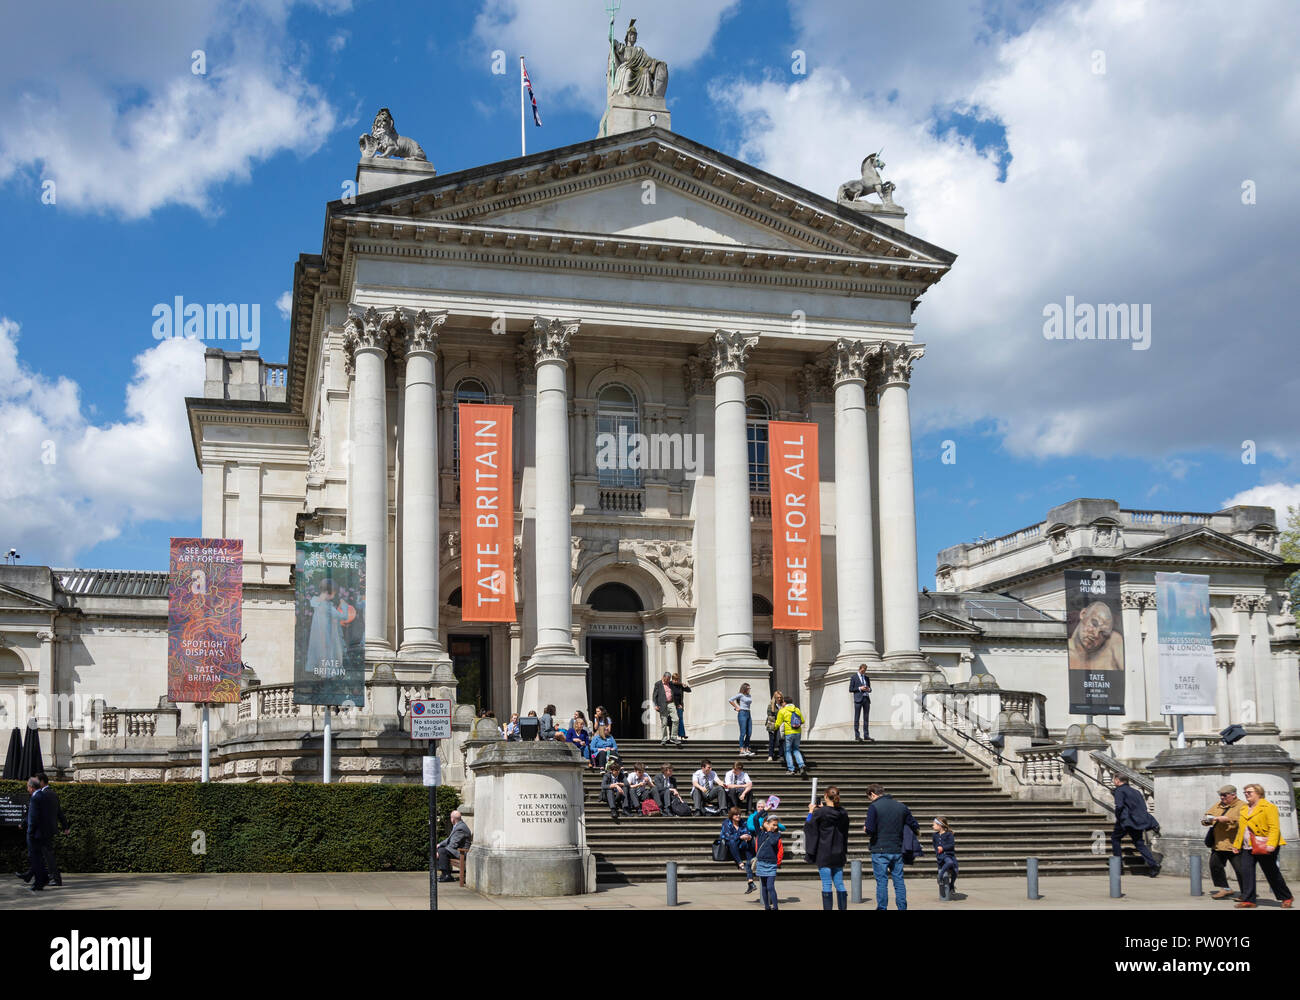 La Tate Britain, Millbank, City of London, Greater London, Angleterre, Royaume-Uni Banque D'Images